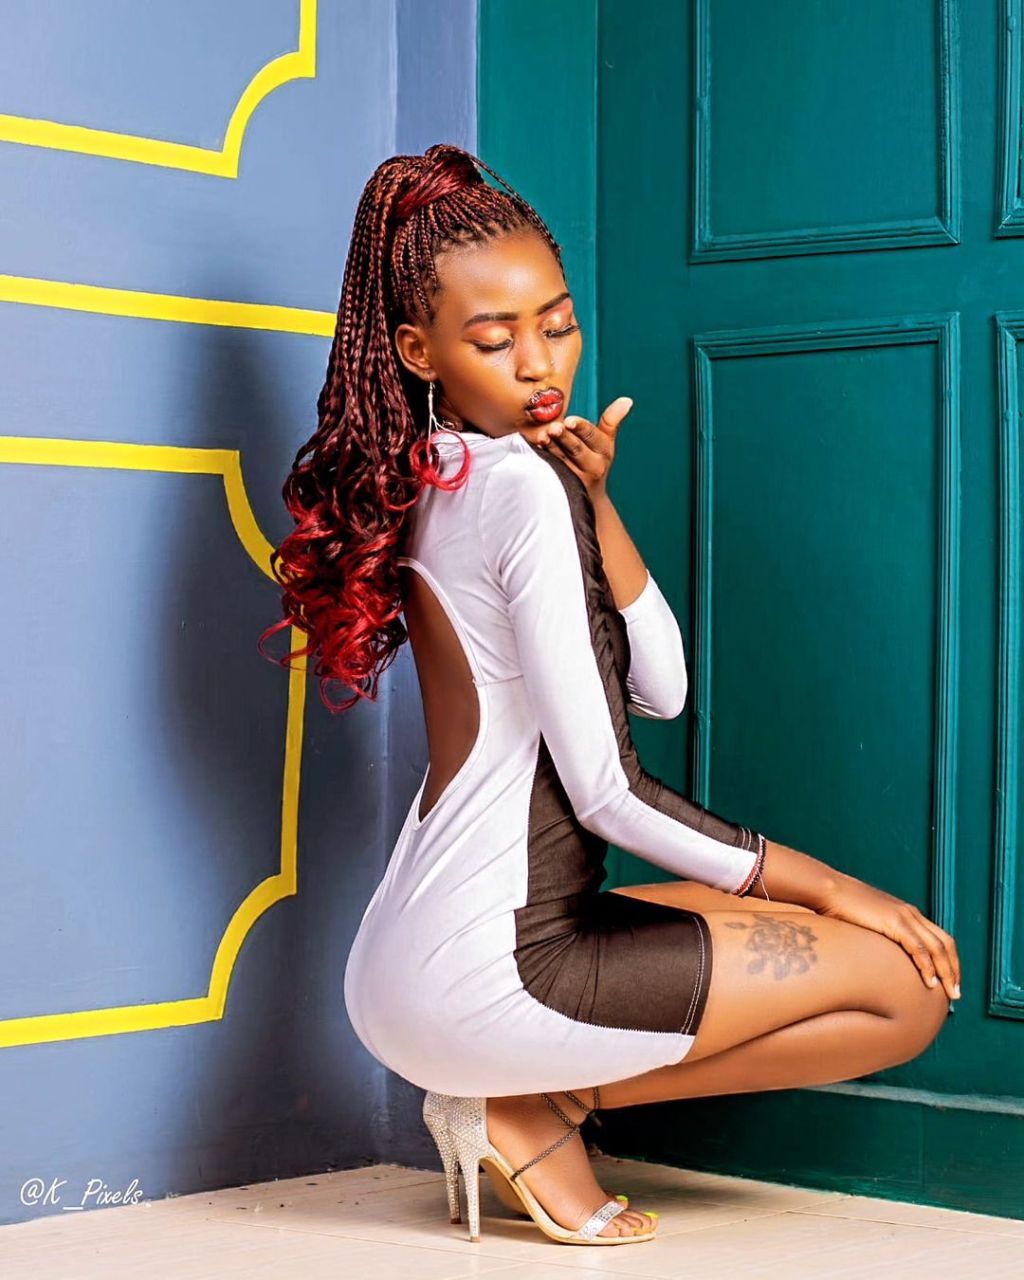 Meet Moanah the Queen, a dynamic Kenyan fashion model and stylist, has made a significant mark in the fashion industry through her unique blend of style and creativity.